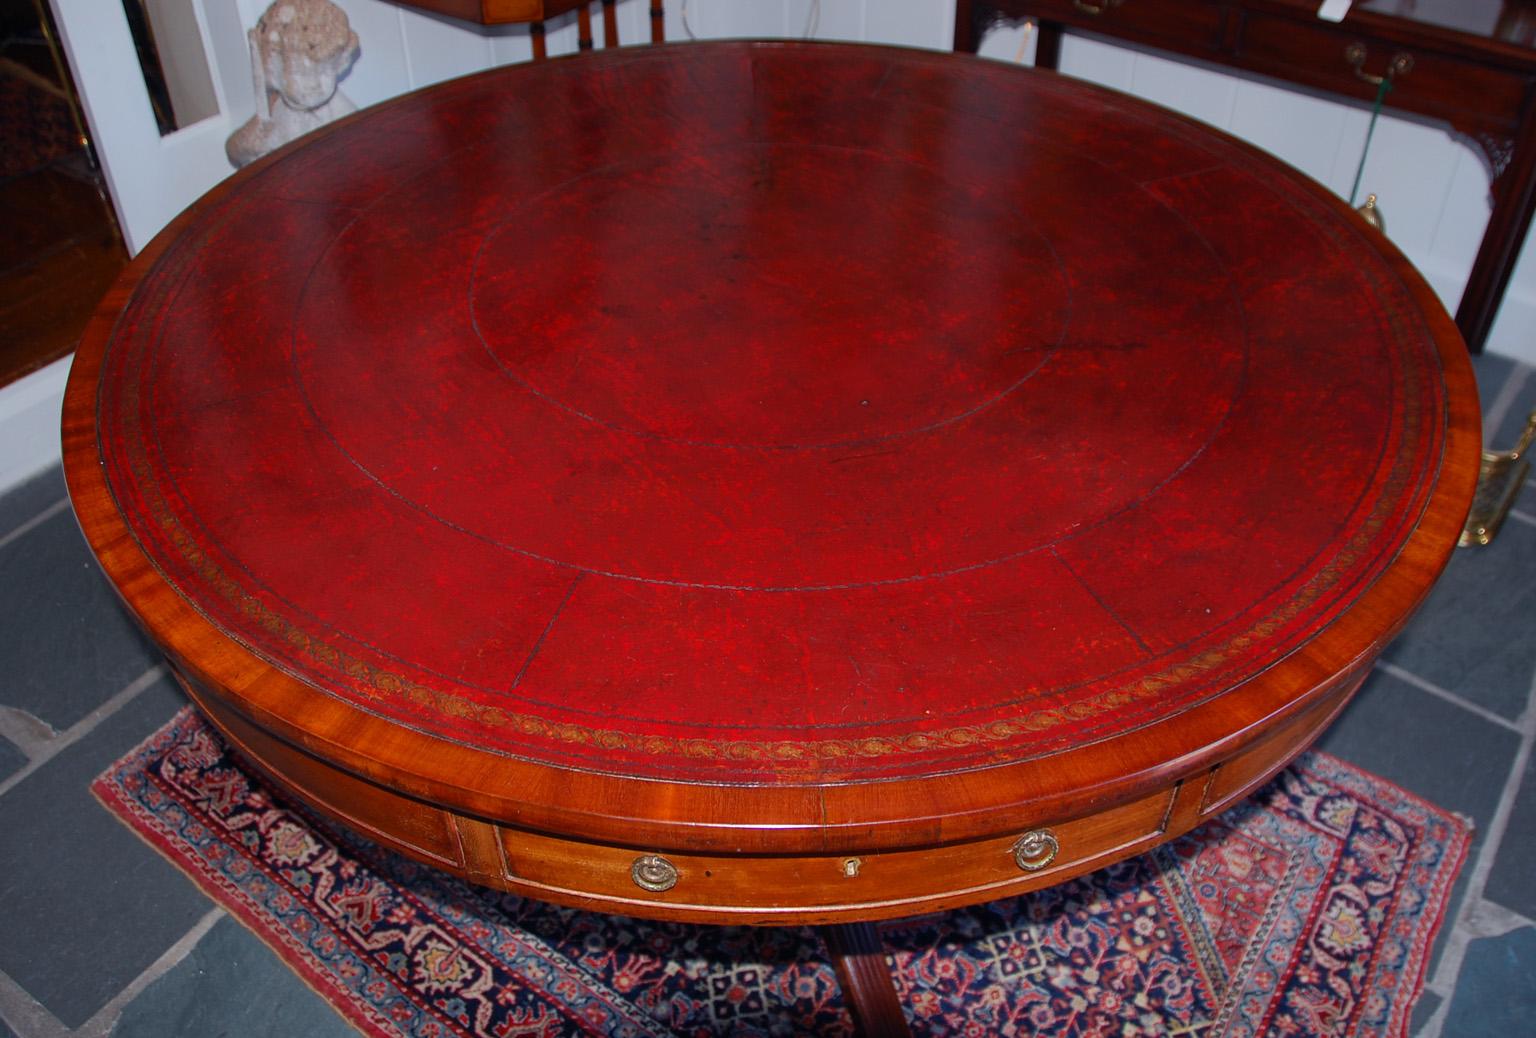 19th Century English Regency Mahogany Drum or Library Table with Leather Inset, Pedestal Base